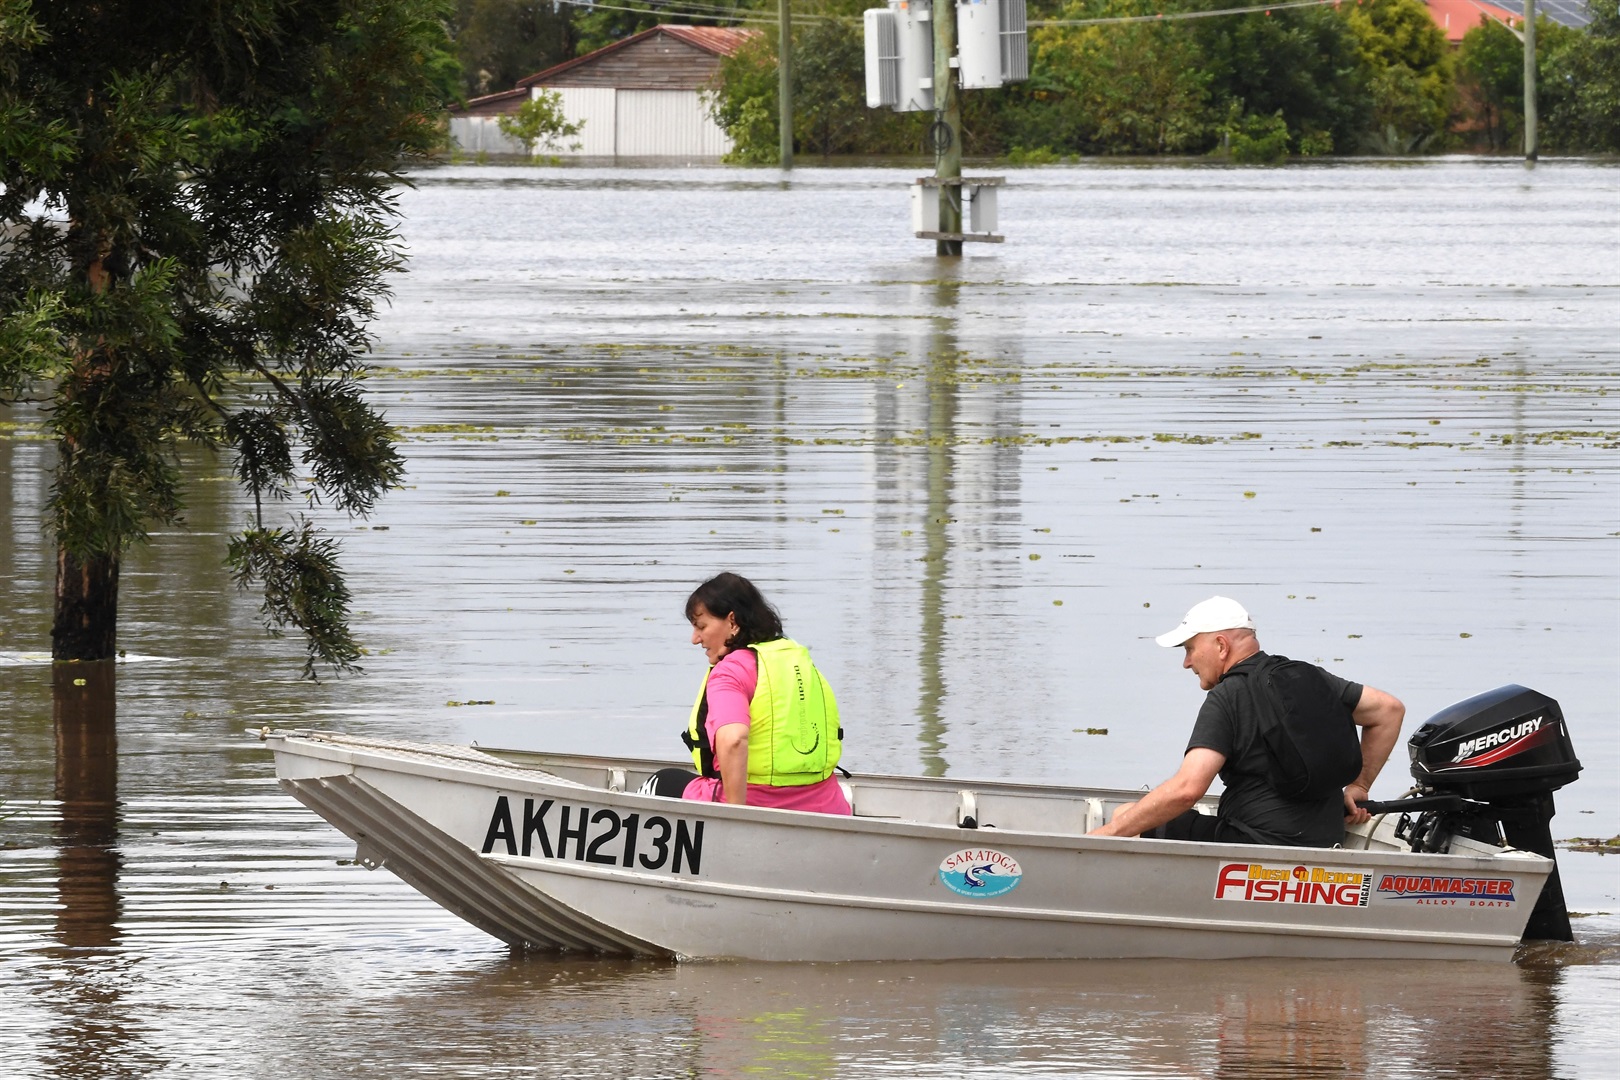 A family steers their boat through a flooded street in the New South Wales suburb of Lawrence. SAEED KHAN/AFP via Getty Images